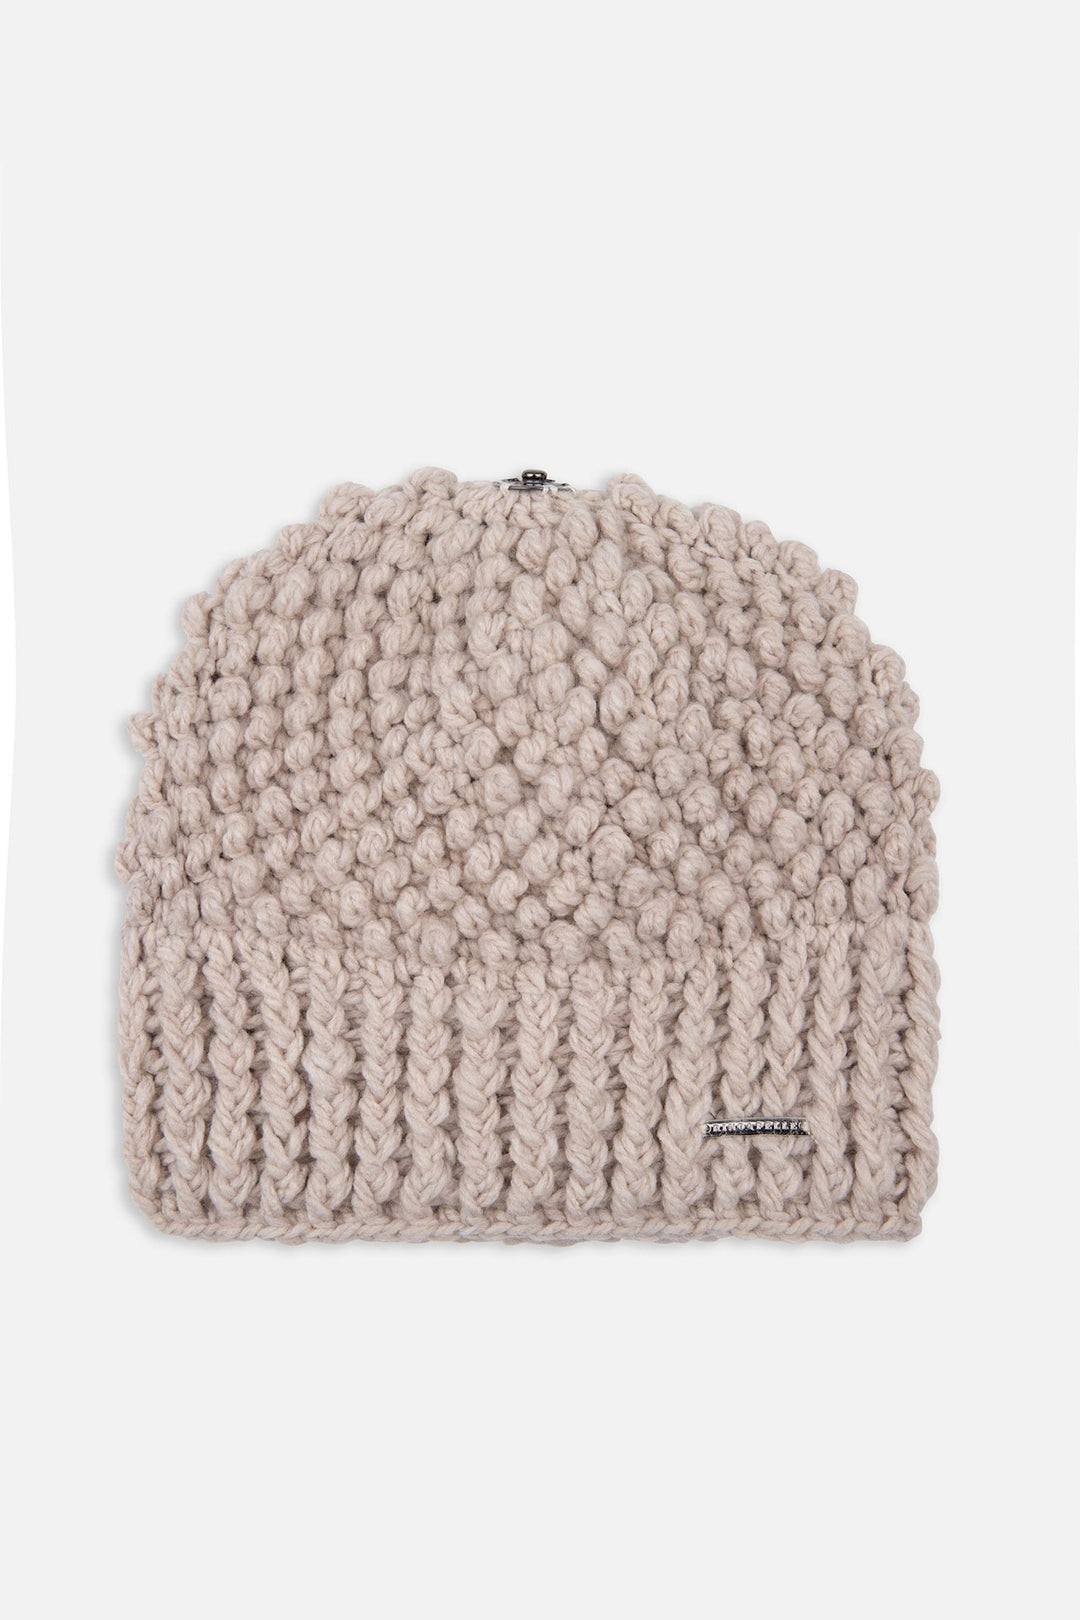 Rino & Pelle Kevina Knitted Beanie with Pom Pom Birch | Dotique